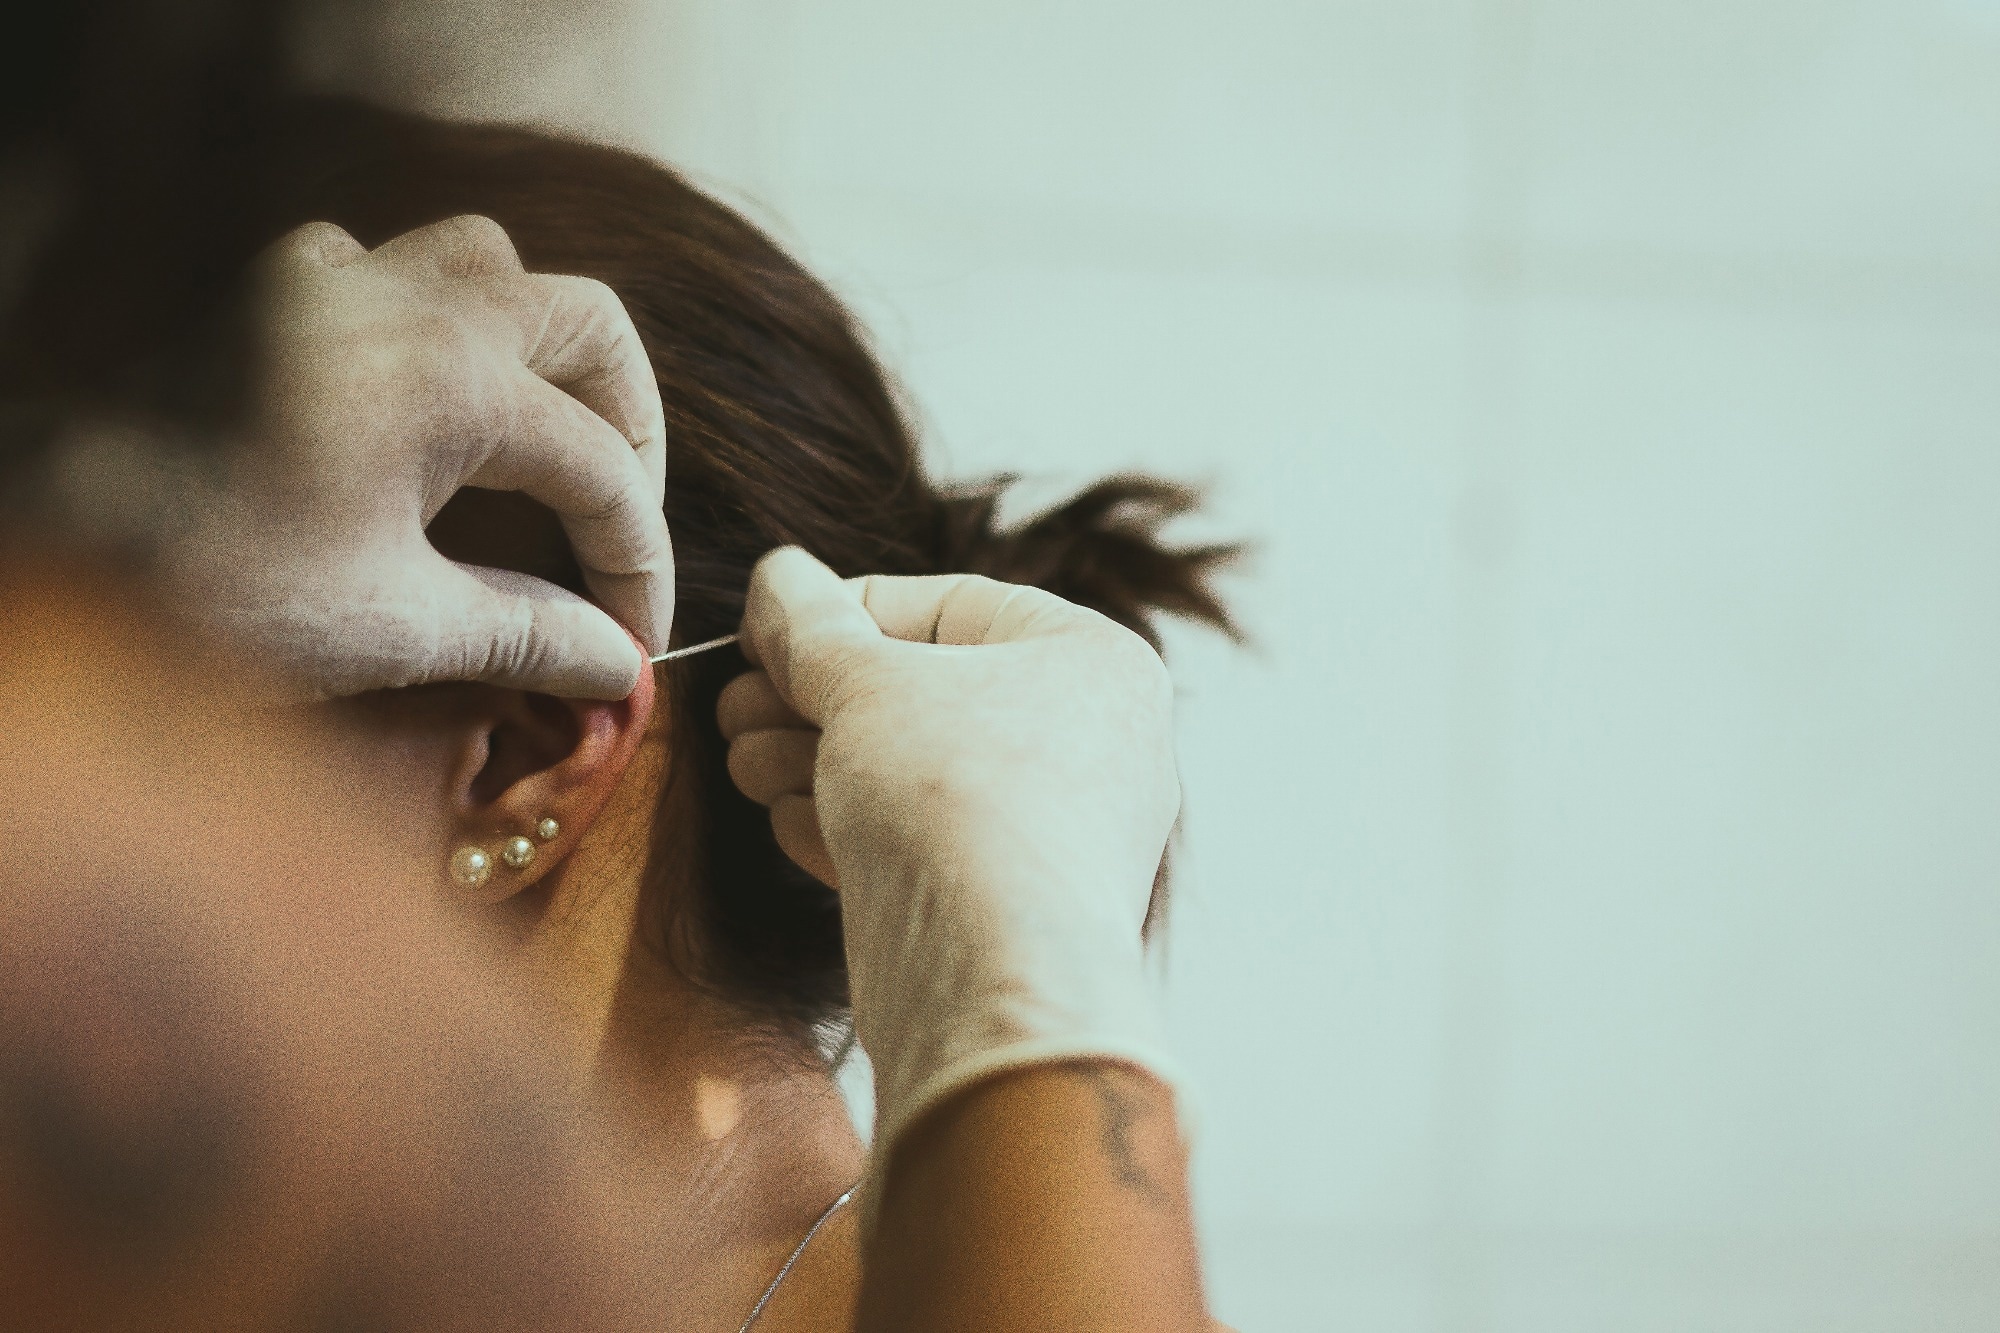 Study: Community Outbreak of Pseudomonas aeruginosa Infections Associated with Contaminated Piercing Aftercare Solution, Australia, 2021. Image Credit: Daiana Campos / Shutterstock